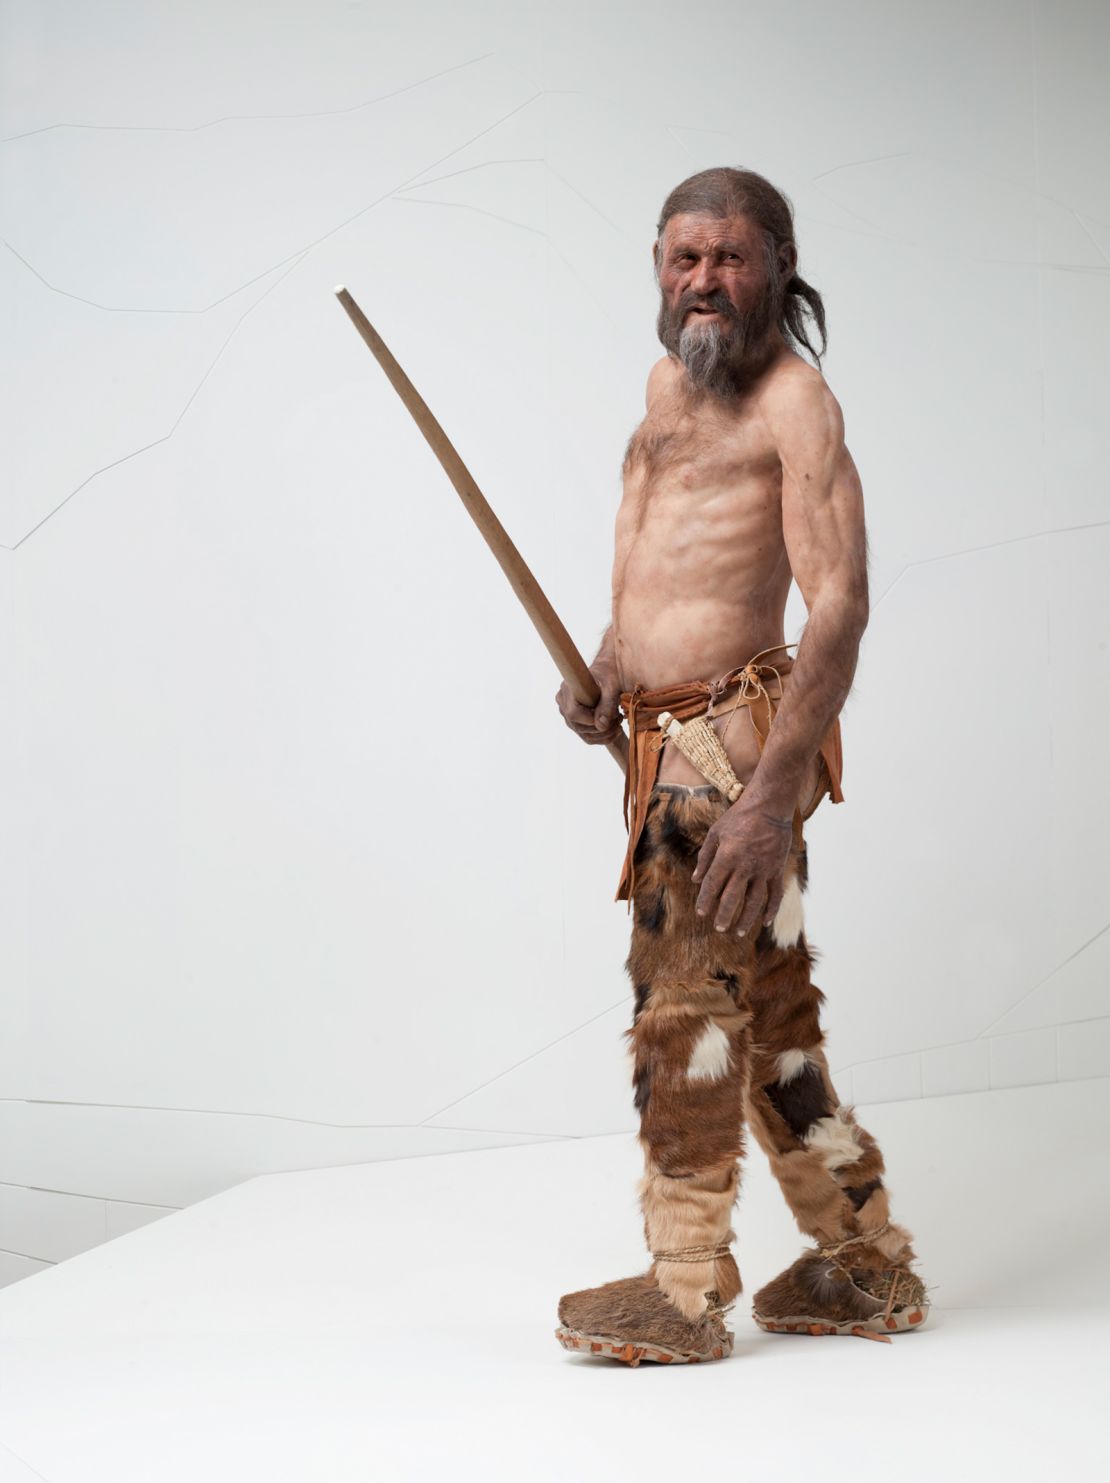 A reconstruction of Ötzi the Iceman is on display at the South Tyrol Museum of Archaeology. Based on his DNA, scientists now believe he had dark skin and eyes and may have been bald.